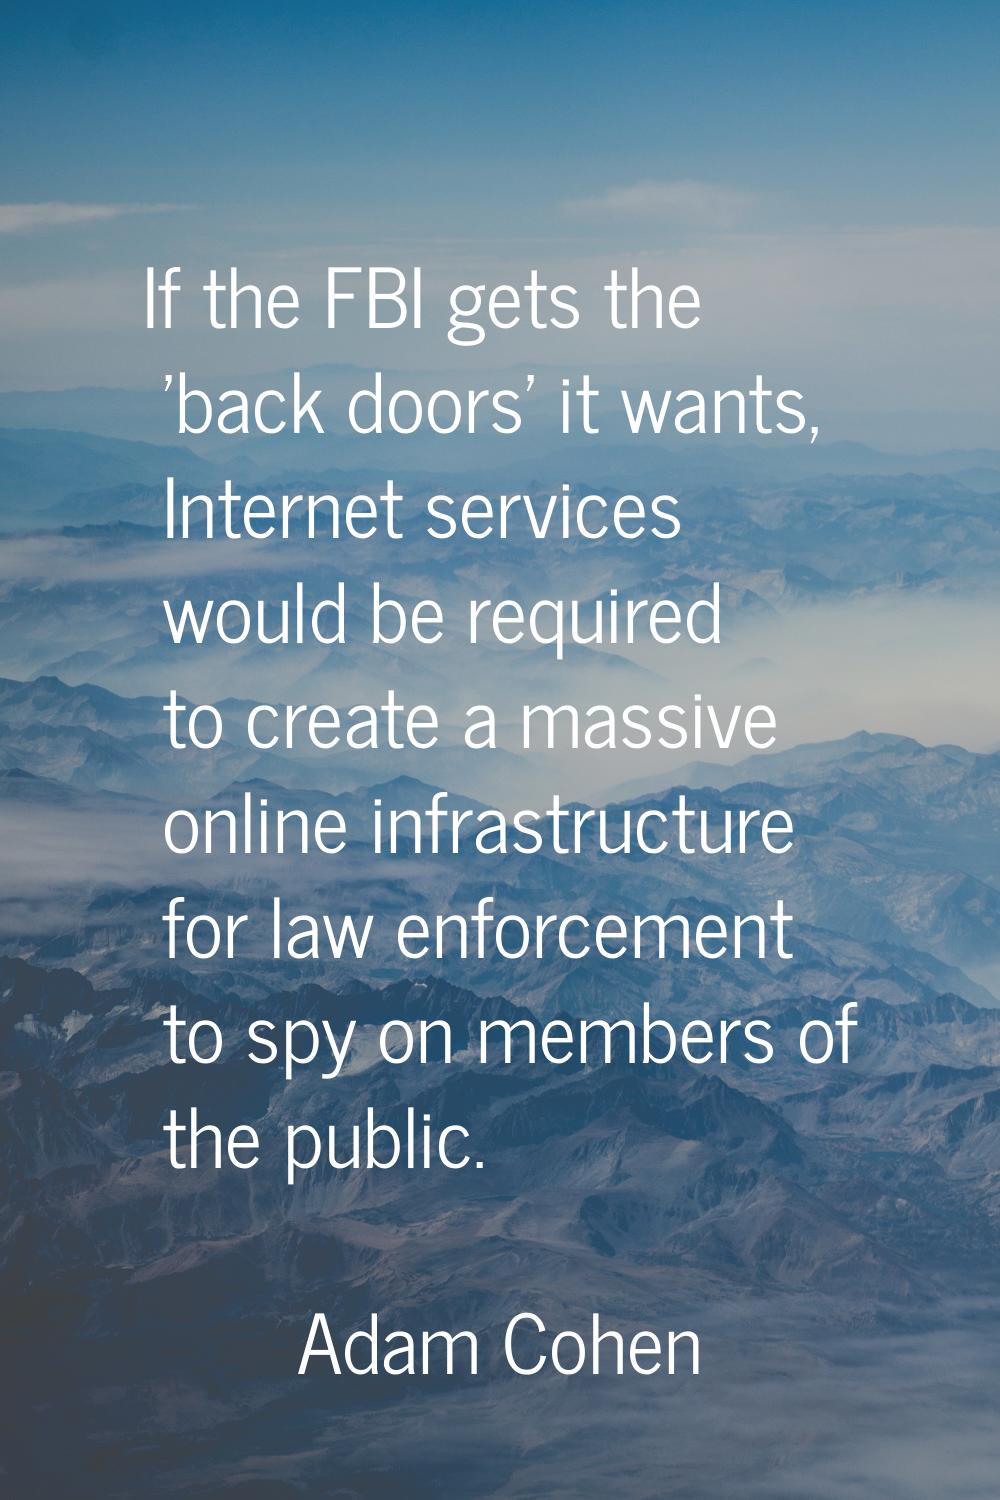 If the FBI gets the 'back doors' it wants, Internet services would be required to create a massive 